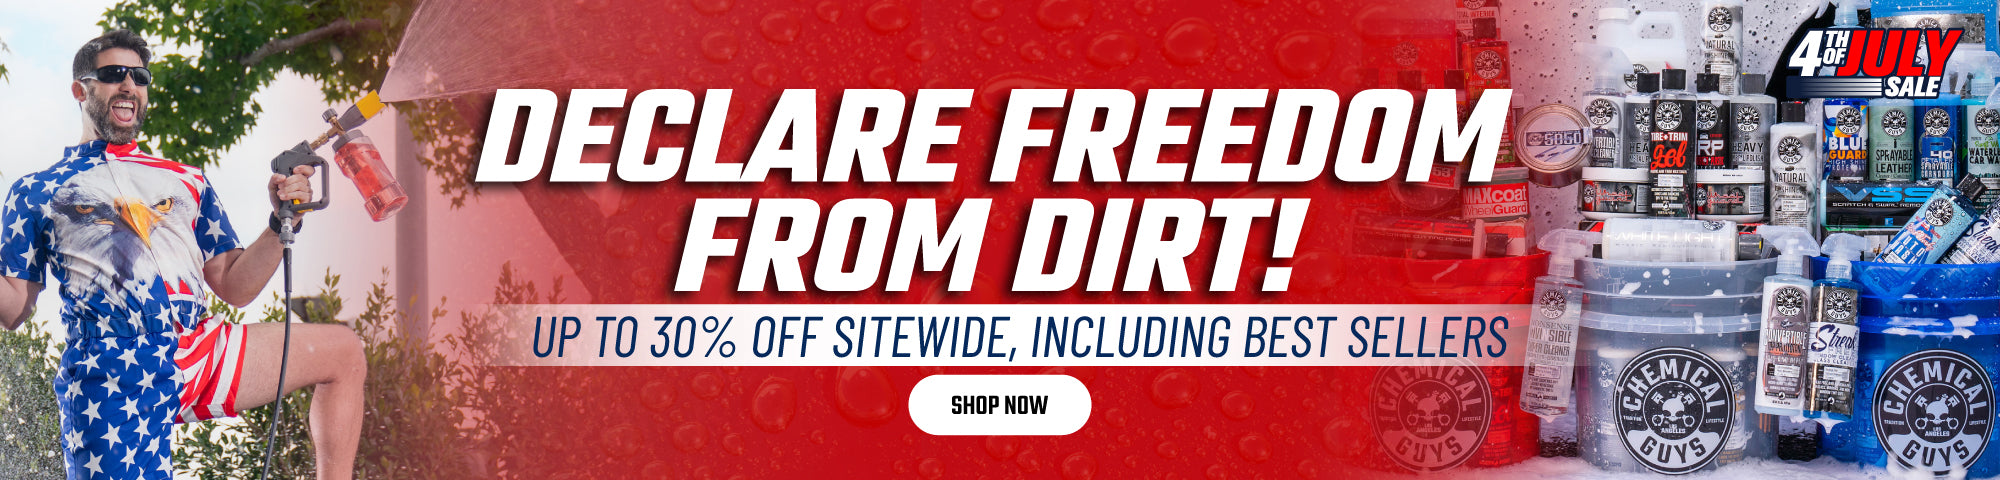 Declare Freedom From Dirt: Up to 30% Off Sitewide, Including Best Sellers